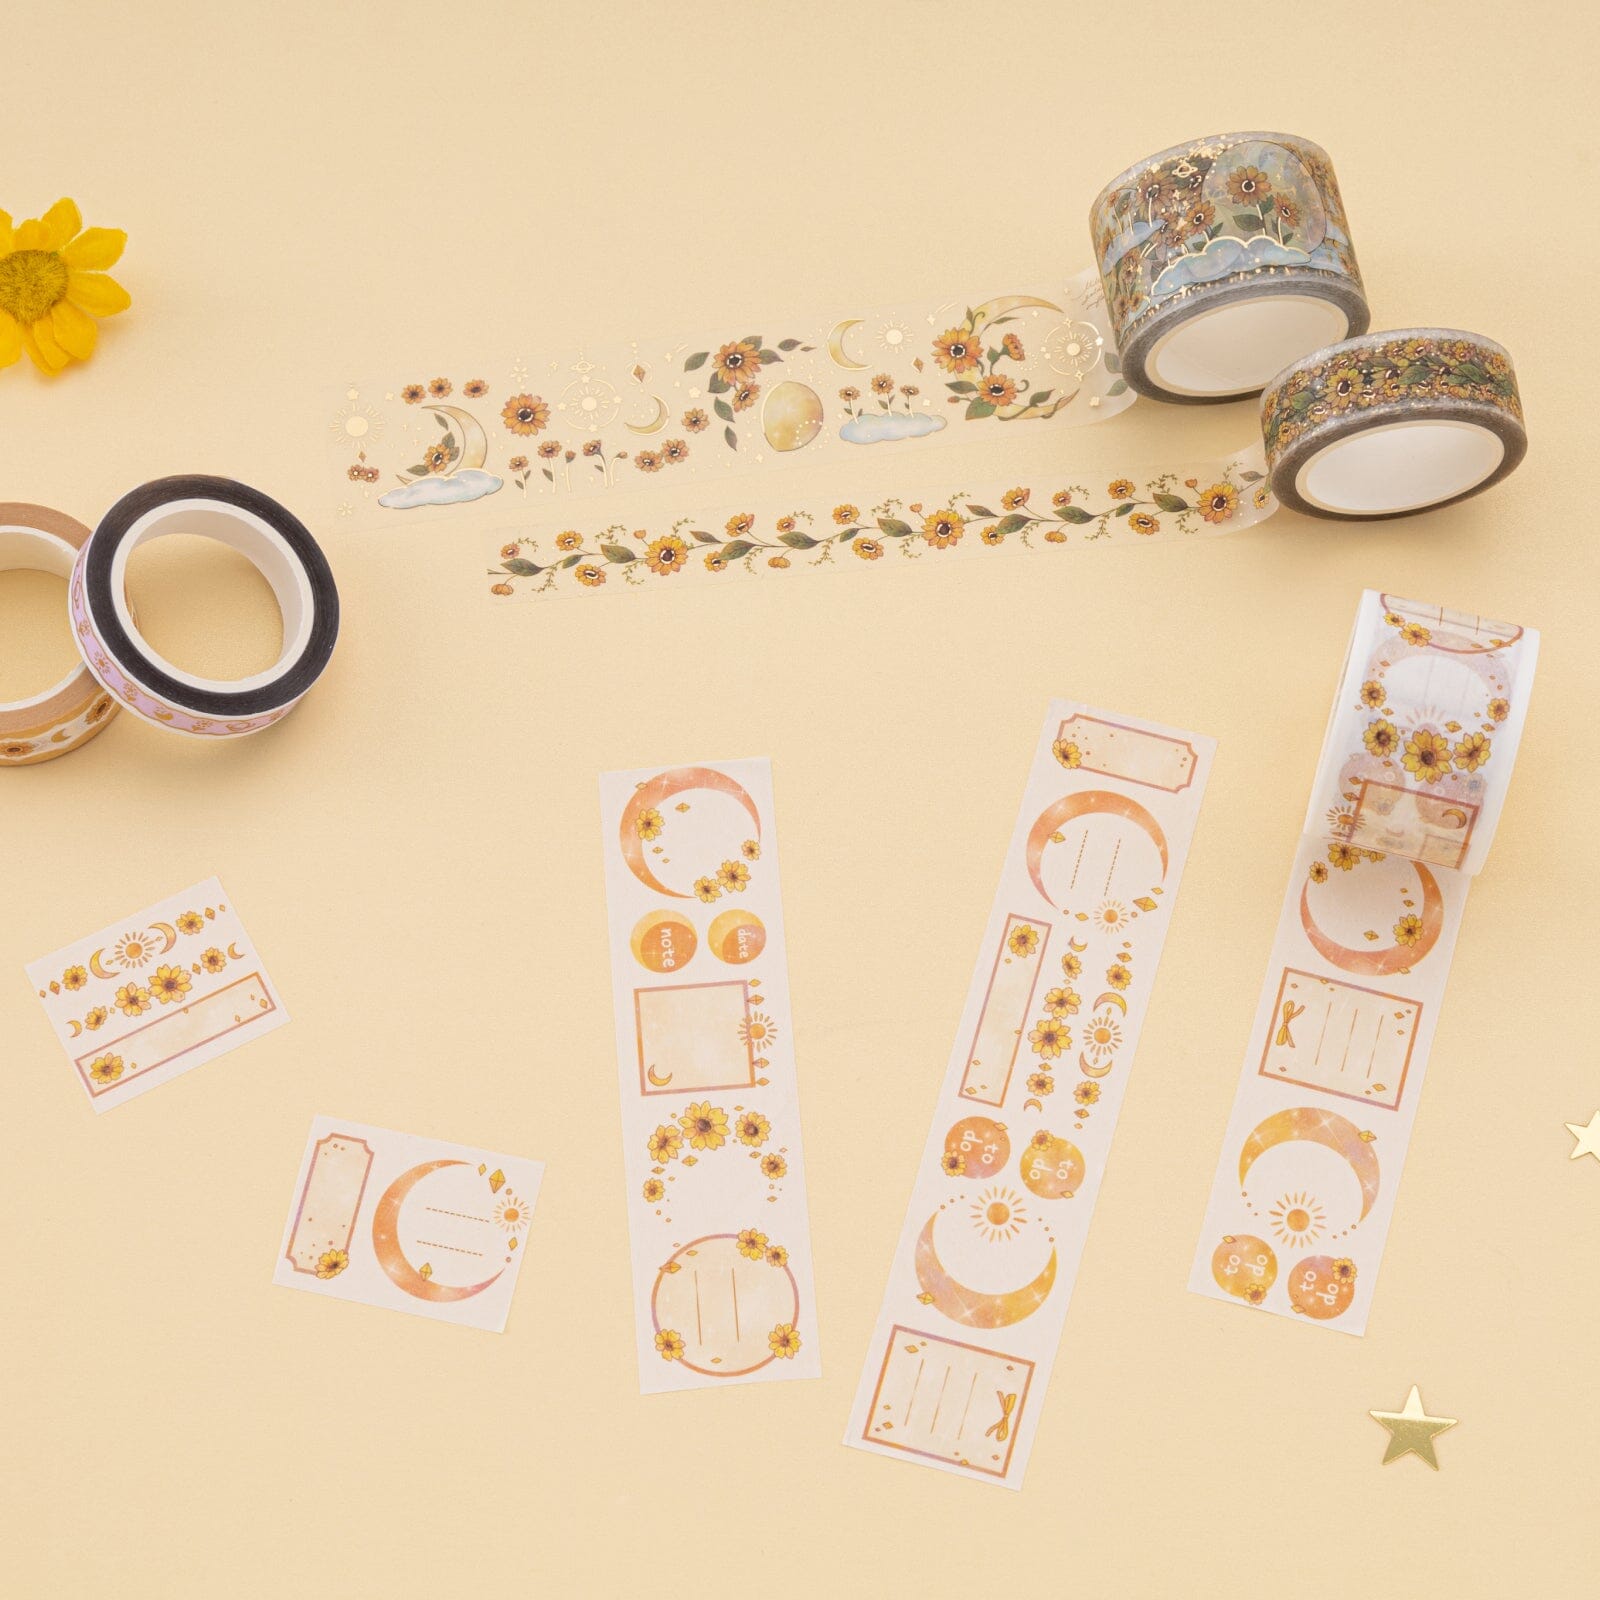 Meadow Flower Washi Tape, Gold Foil Washi Tape, Spring Flower Washi Tape,  Wildflower Washi, Planner Accessories, Travellers Notebook, Bujo